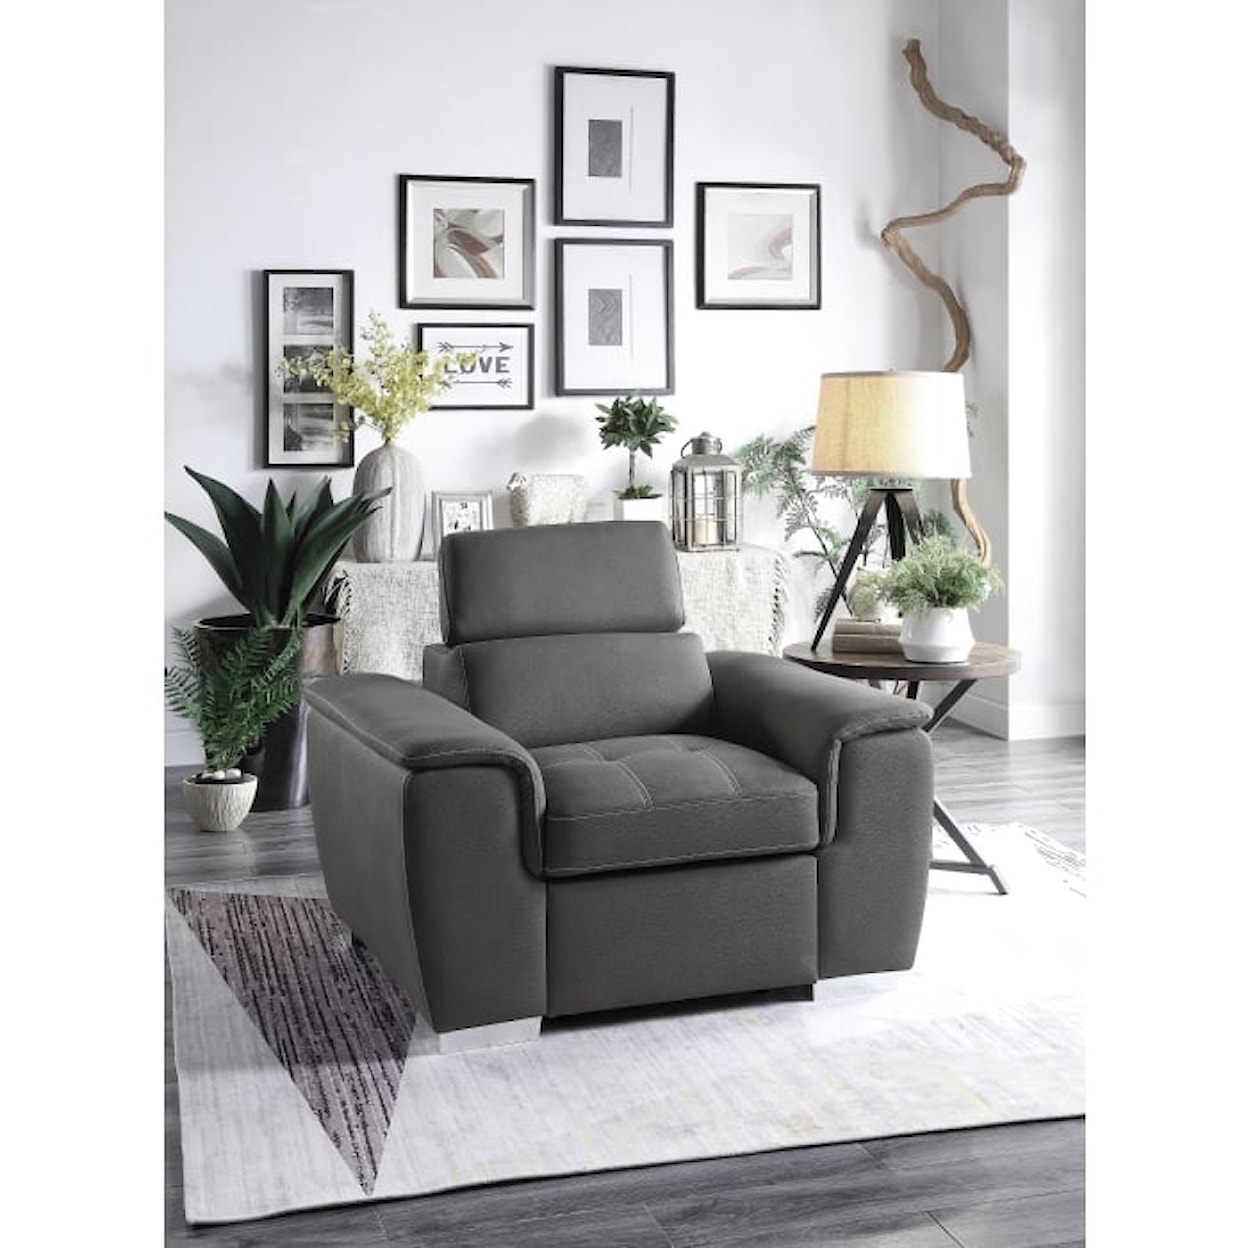 Homelegance Ferriday Chair with Pull-out Ottoman